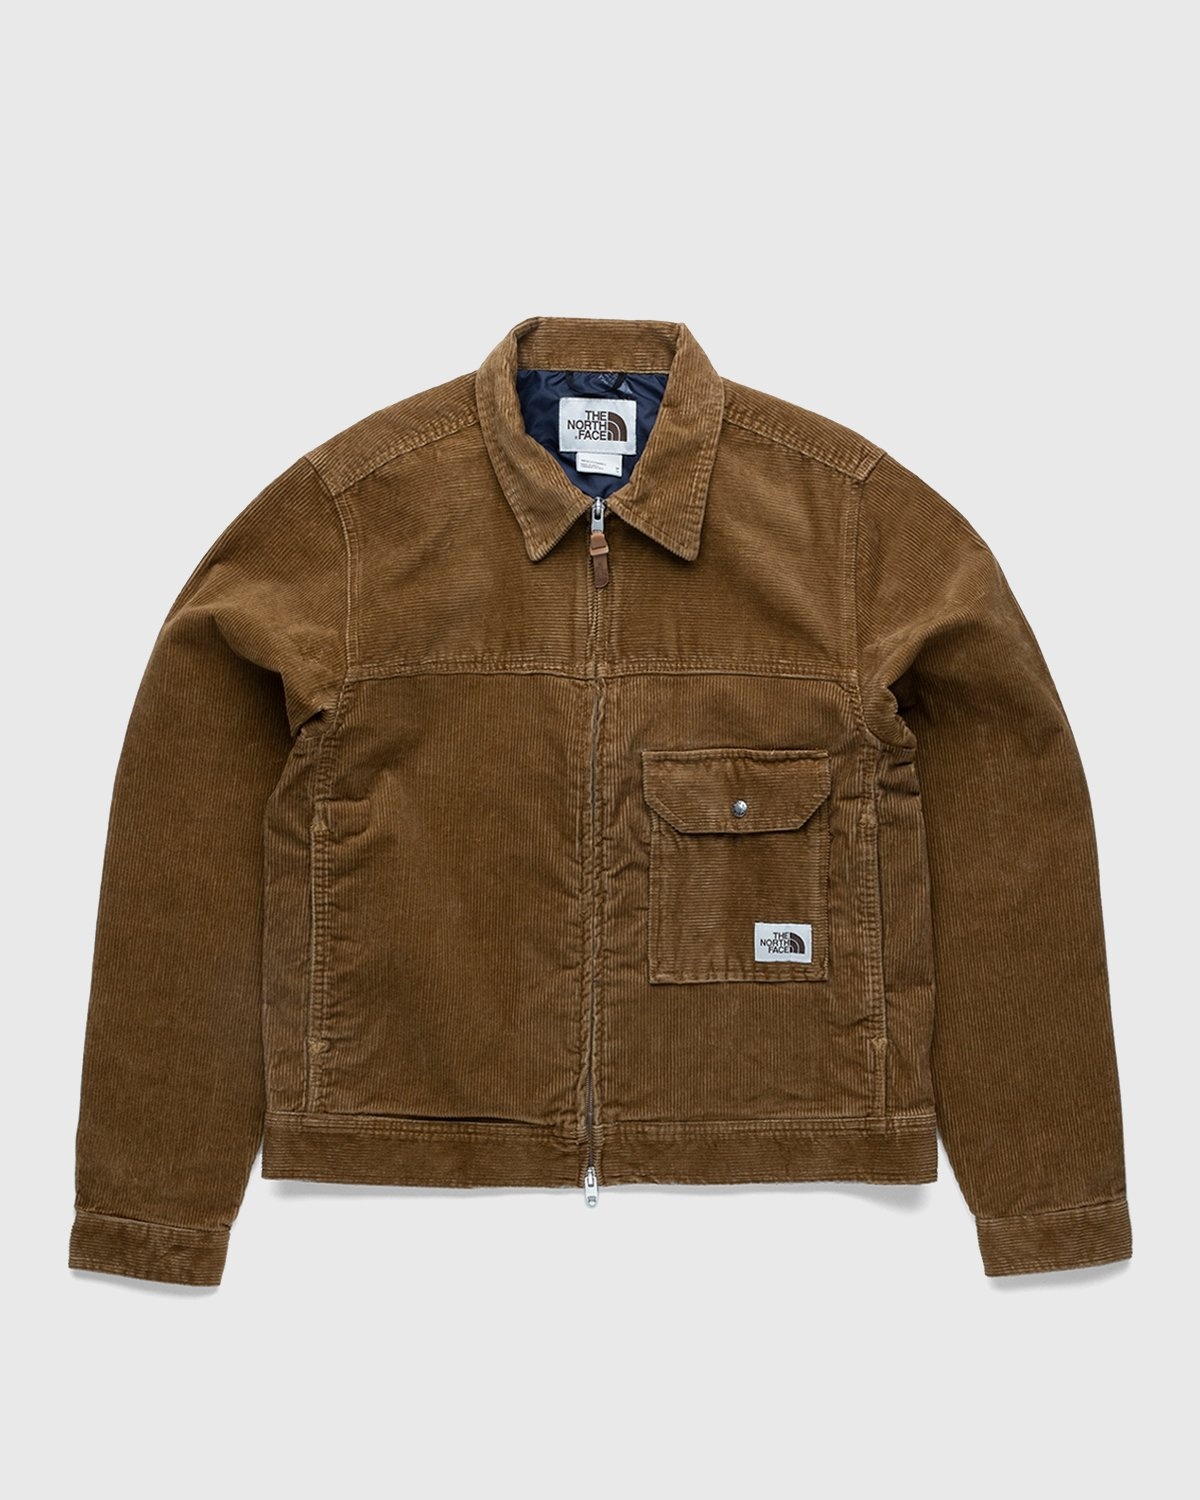 The North Face – Trucker Jacket Utility Brown - Denim Jackets - Brown - Image 1